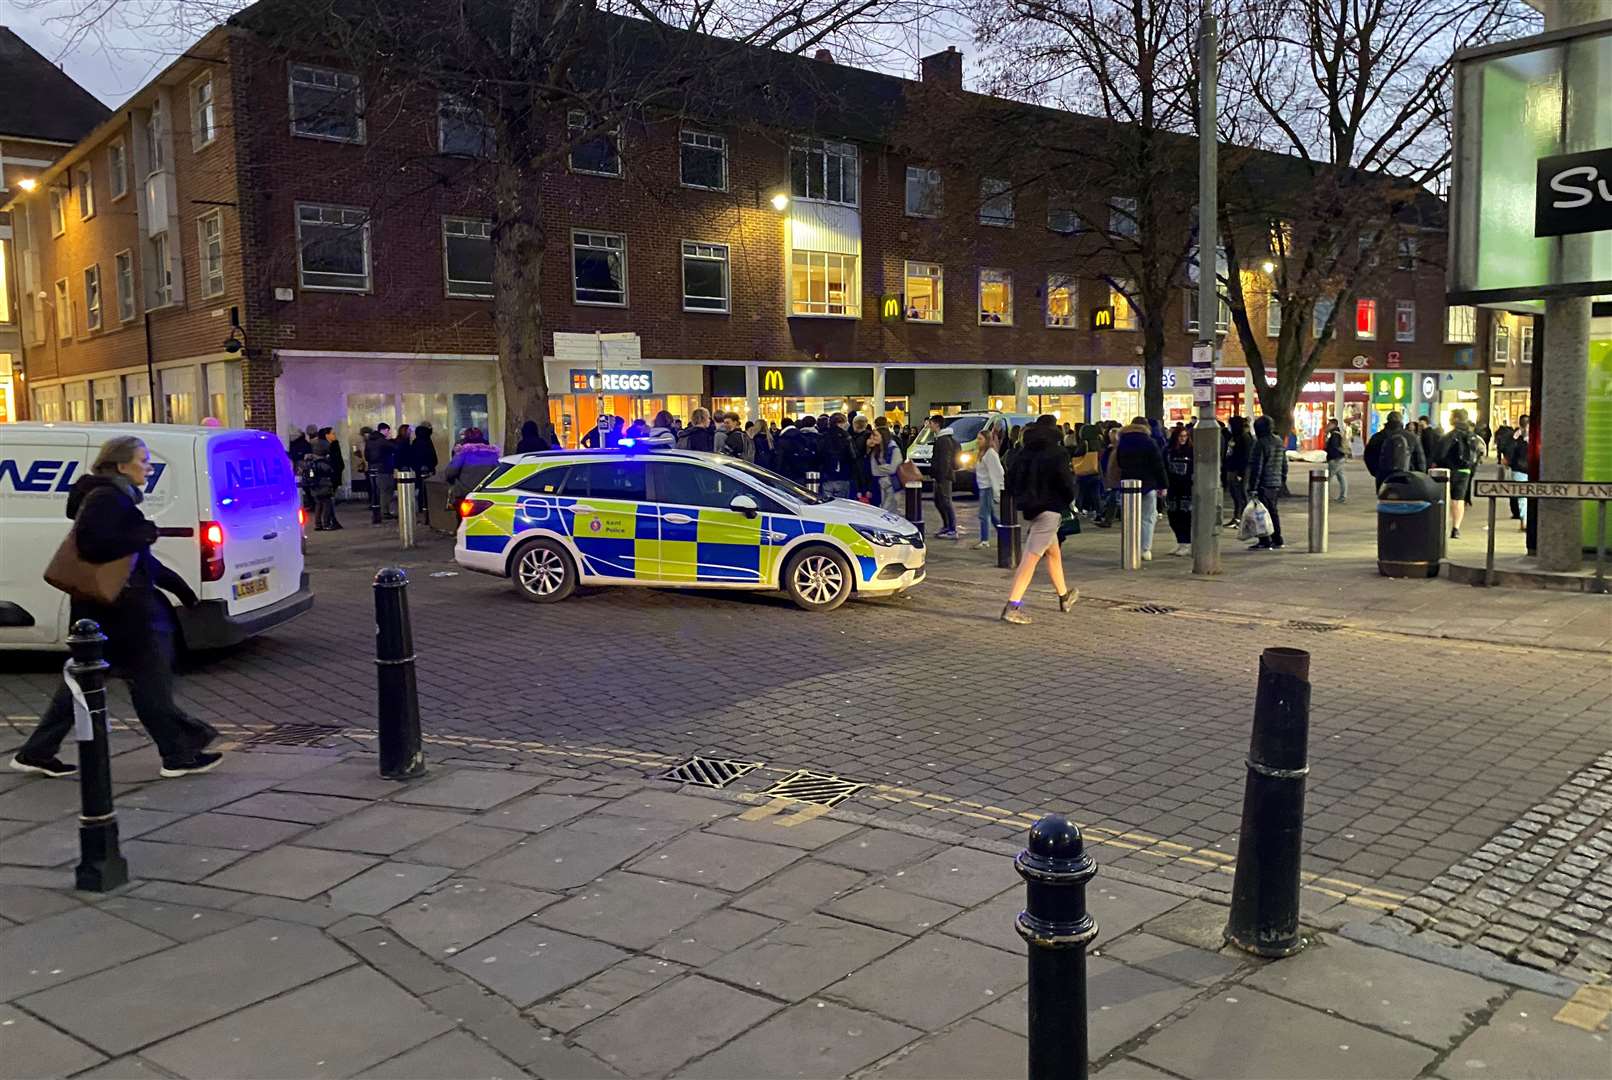 Disturbances outside McDonald’s and Greggs in St George’s Street, Canterbury, can be "intimidating" for others